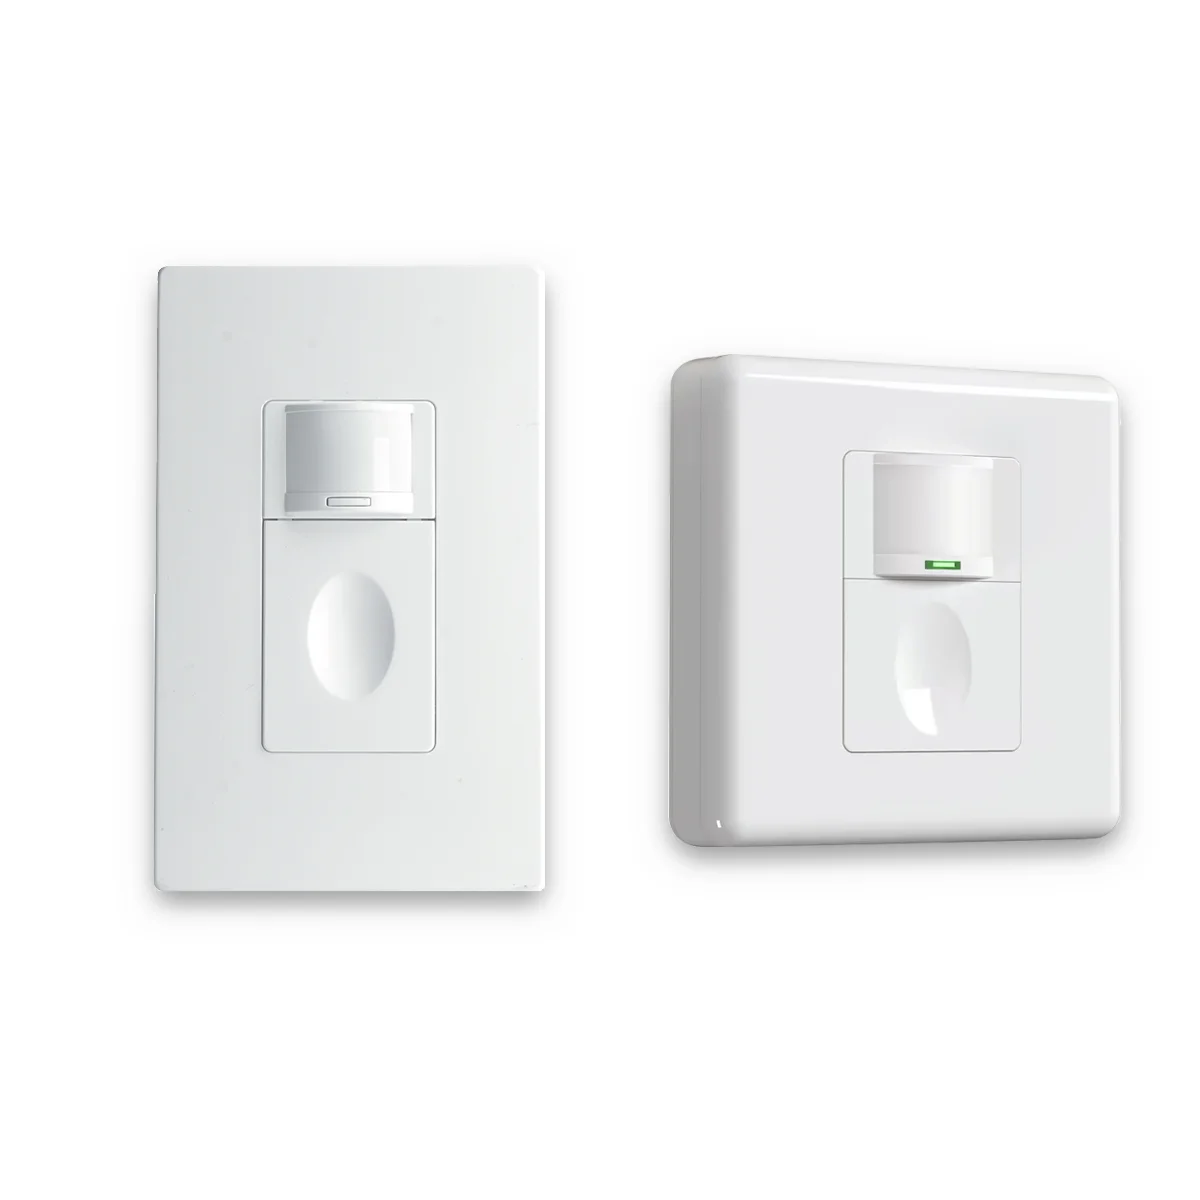 20 Types of Light Switches: What's Right for Your Home?